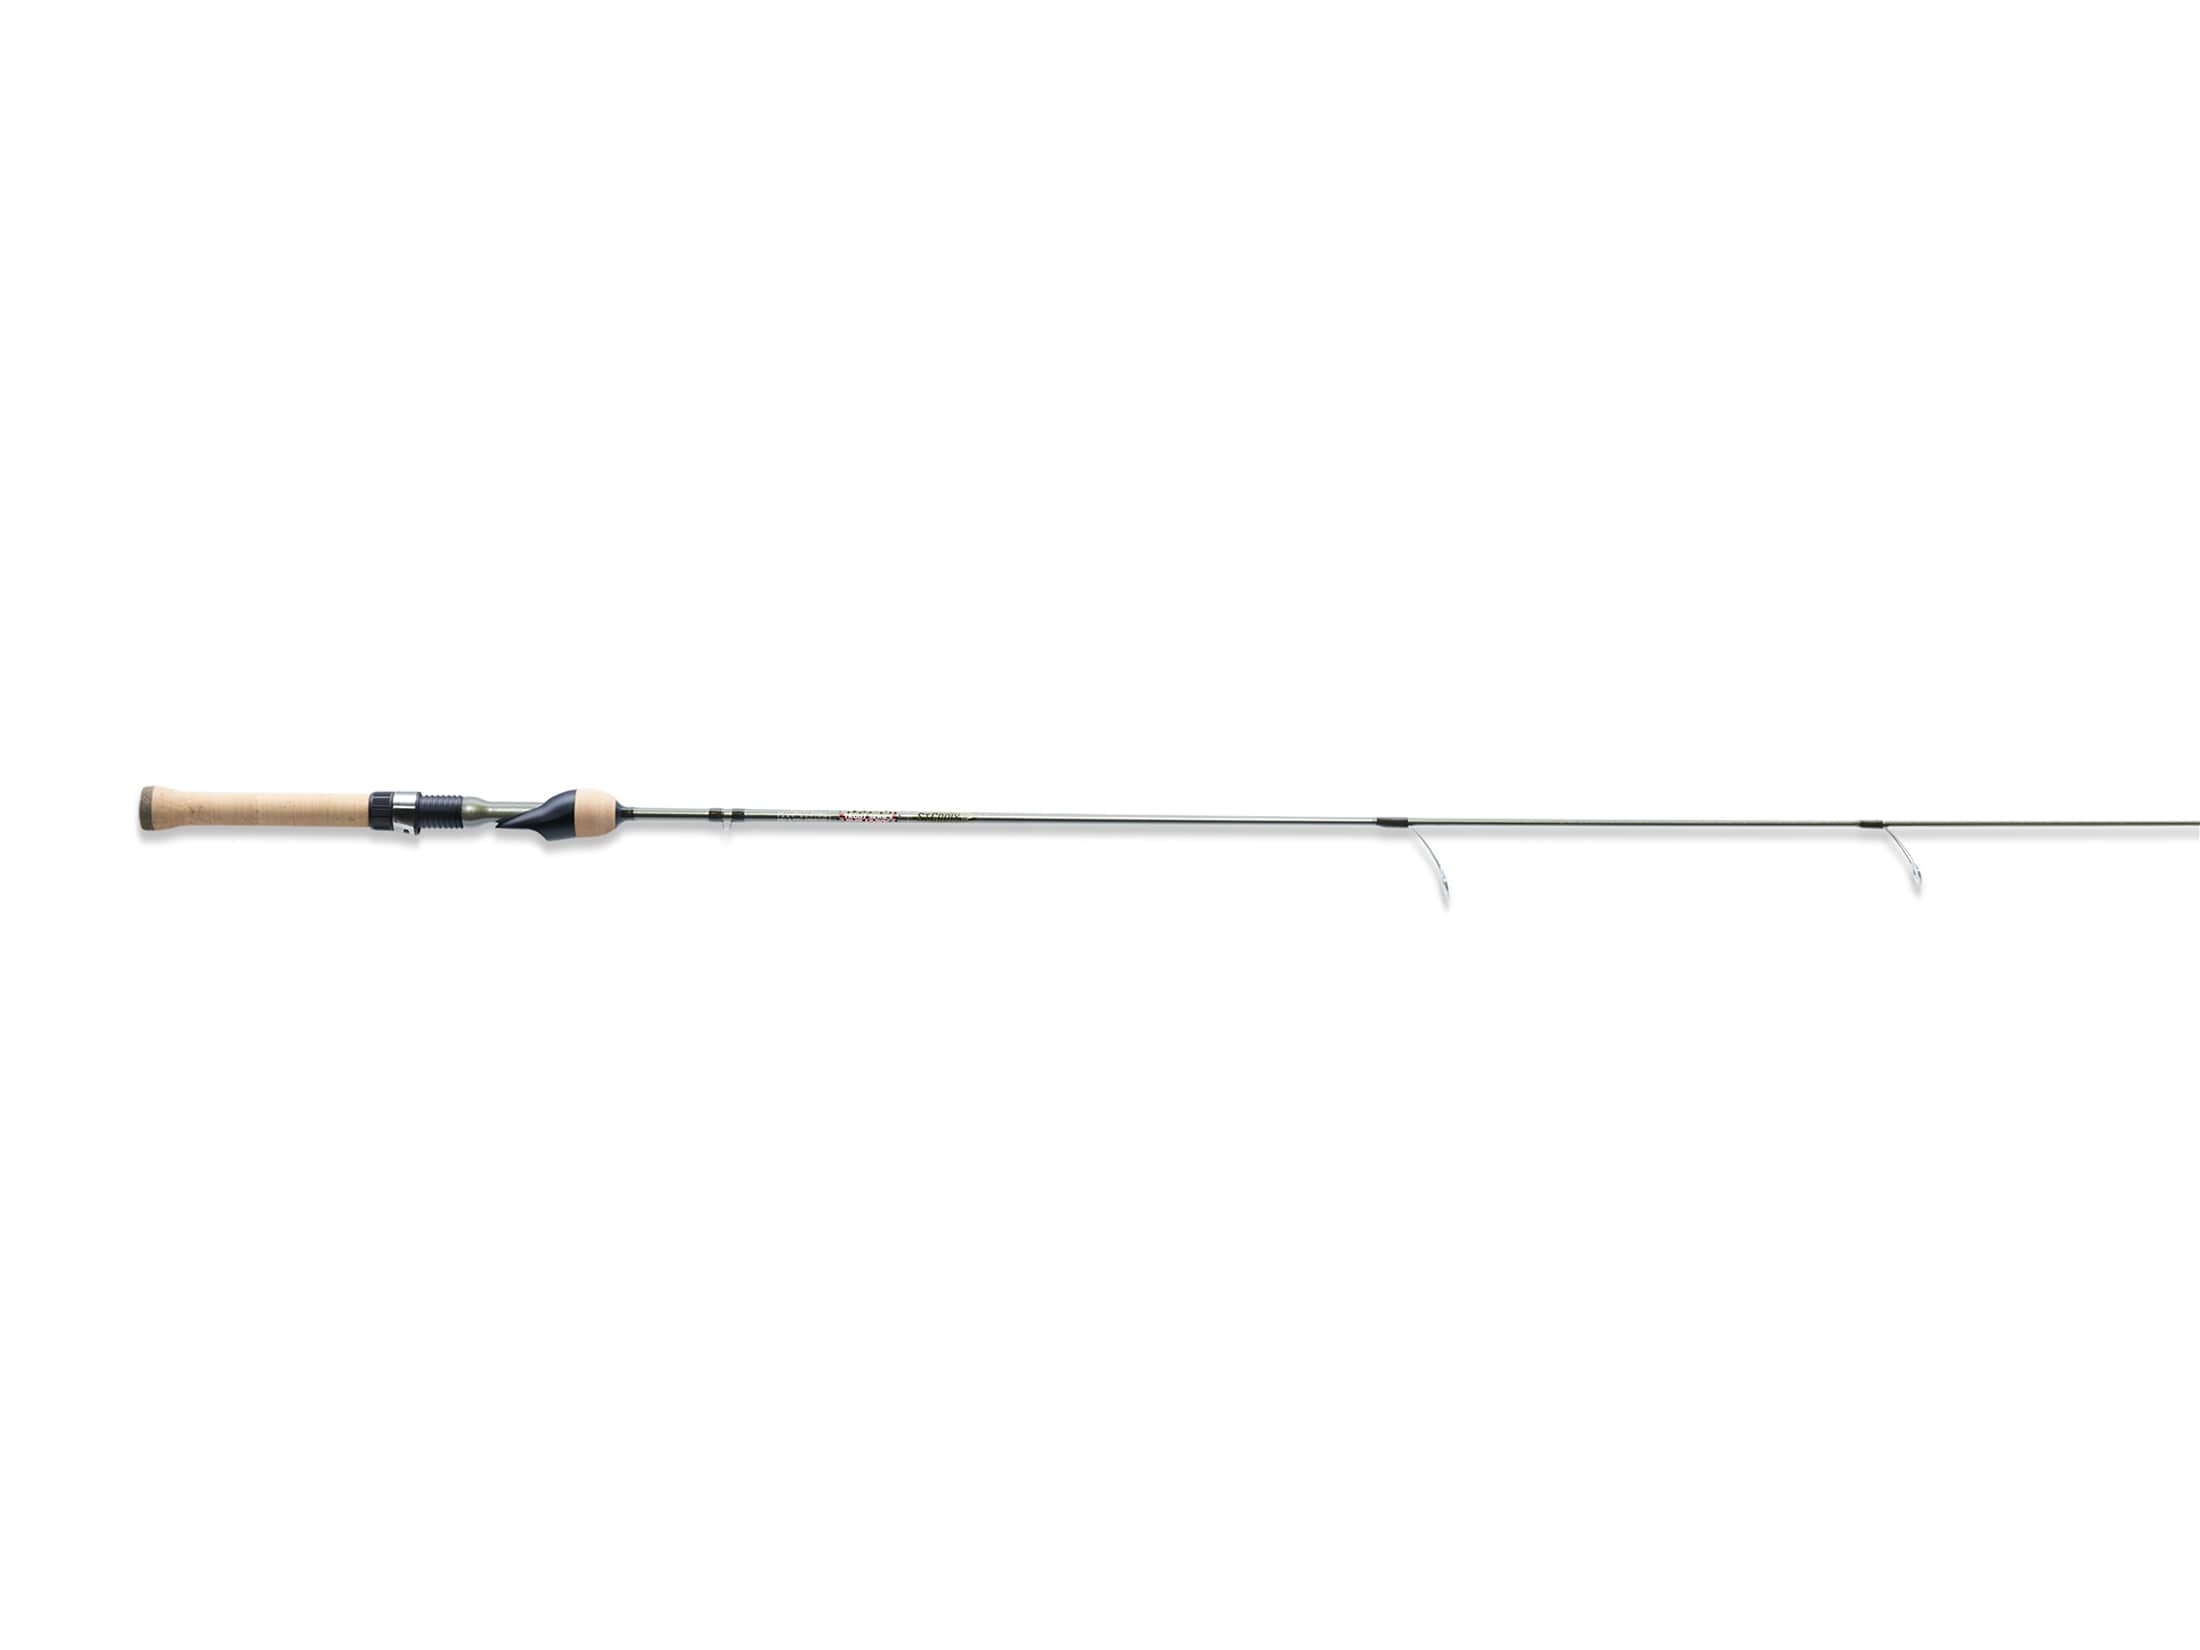 St. Croix Trout Series 6'4 Spinning Rod. tss410ulf. 